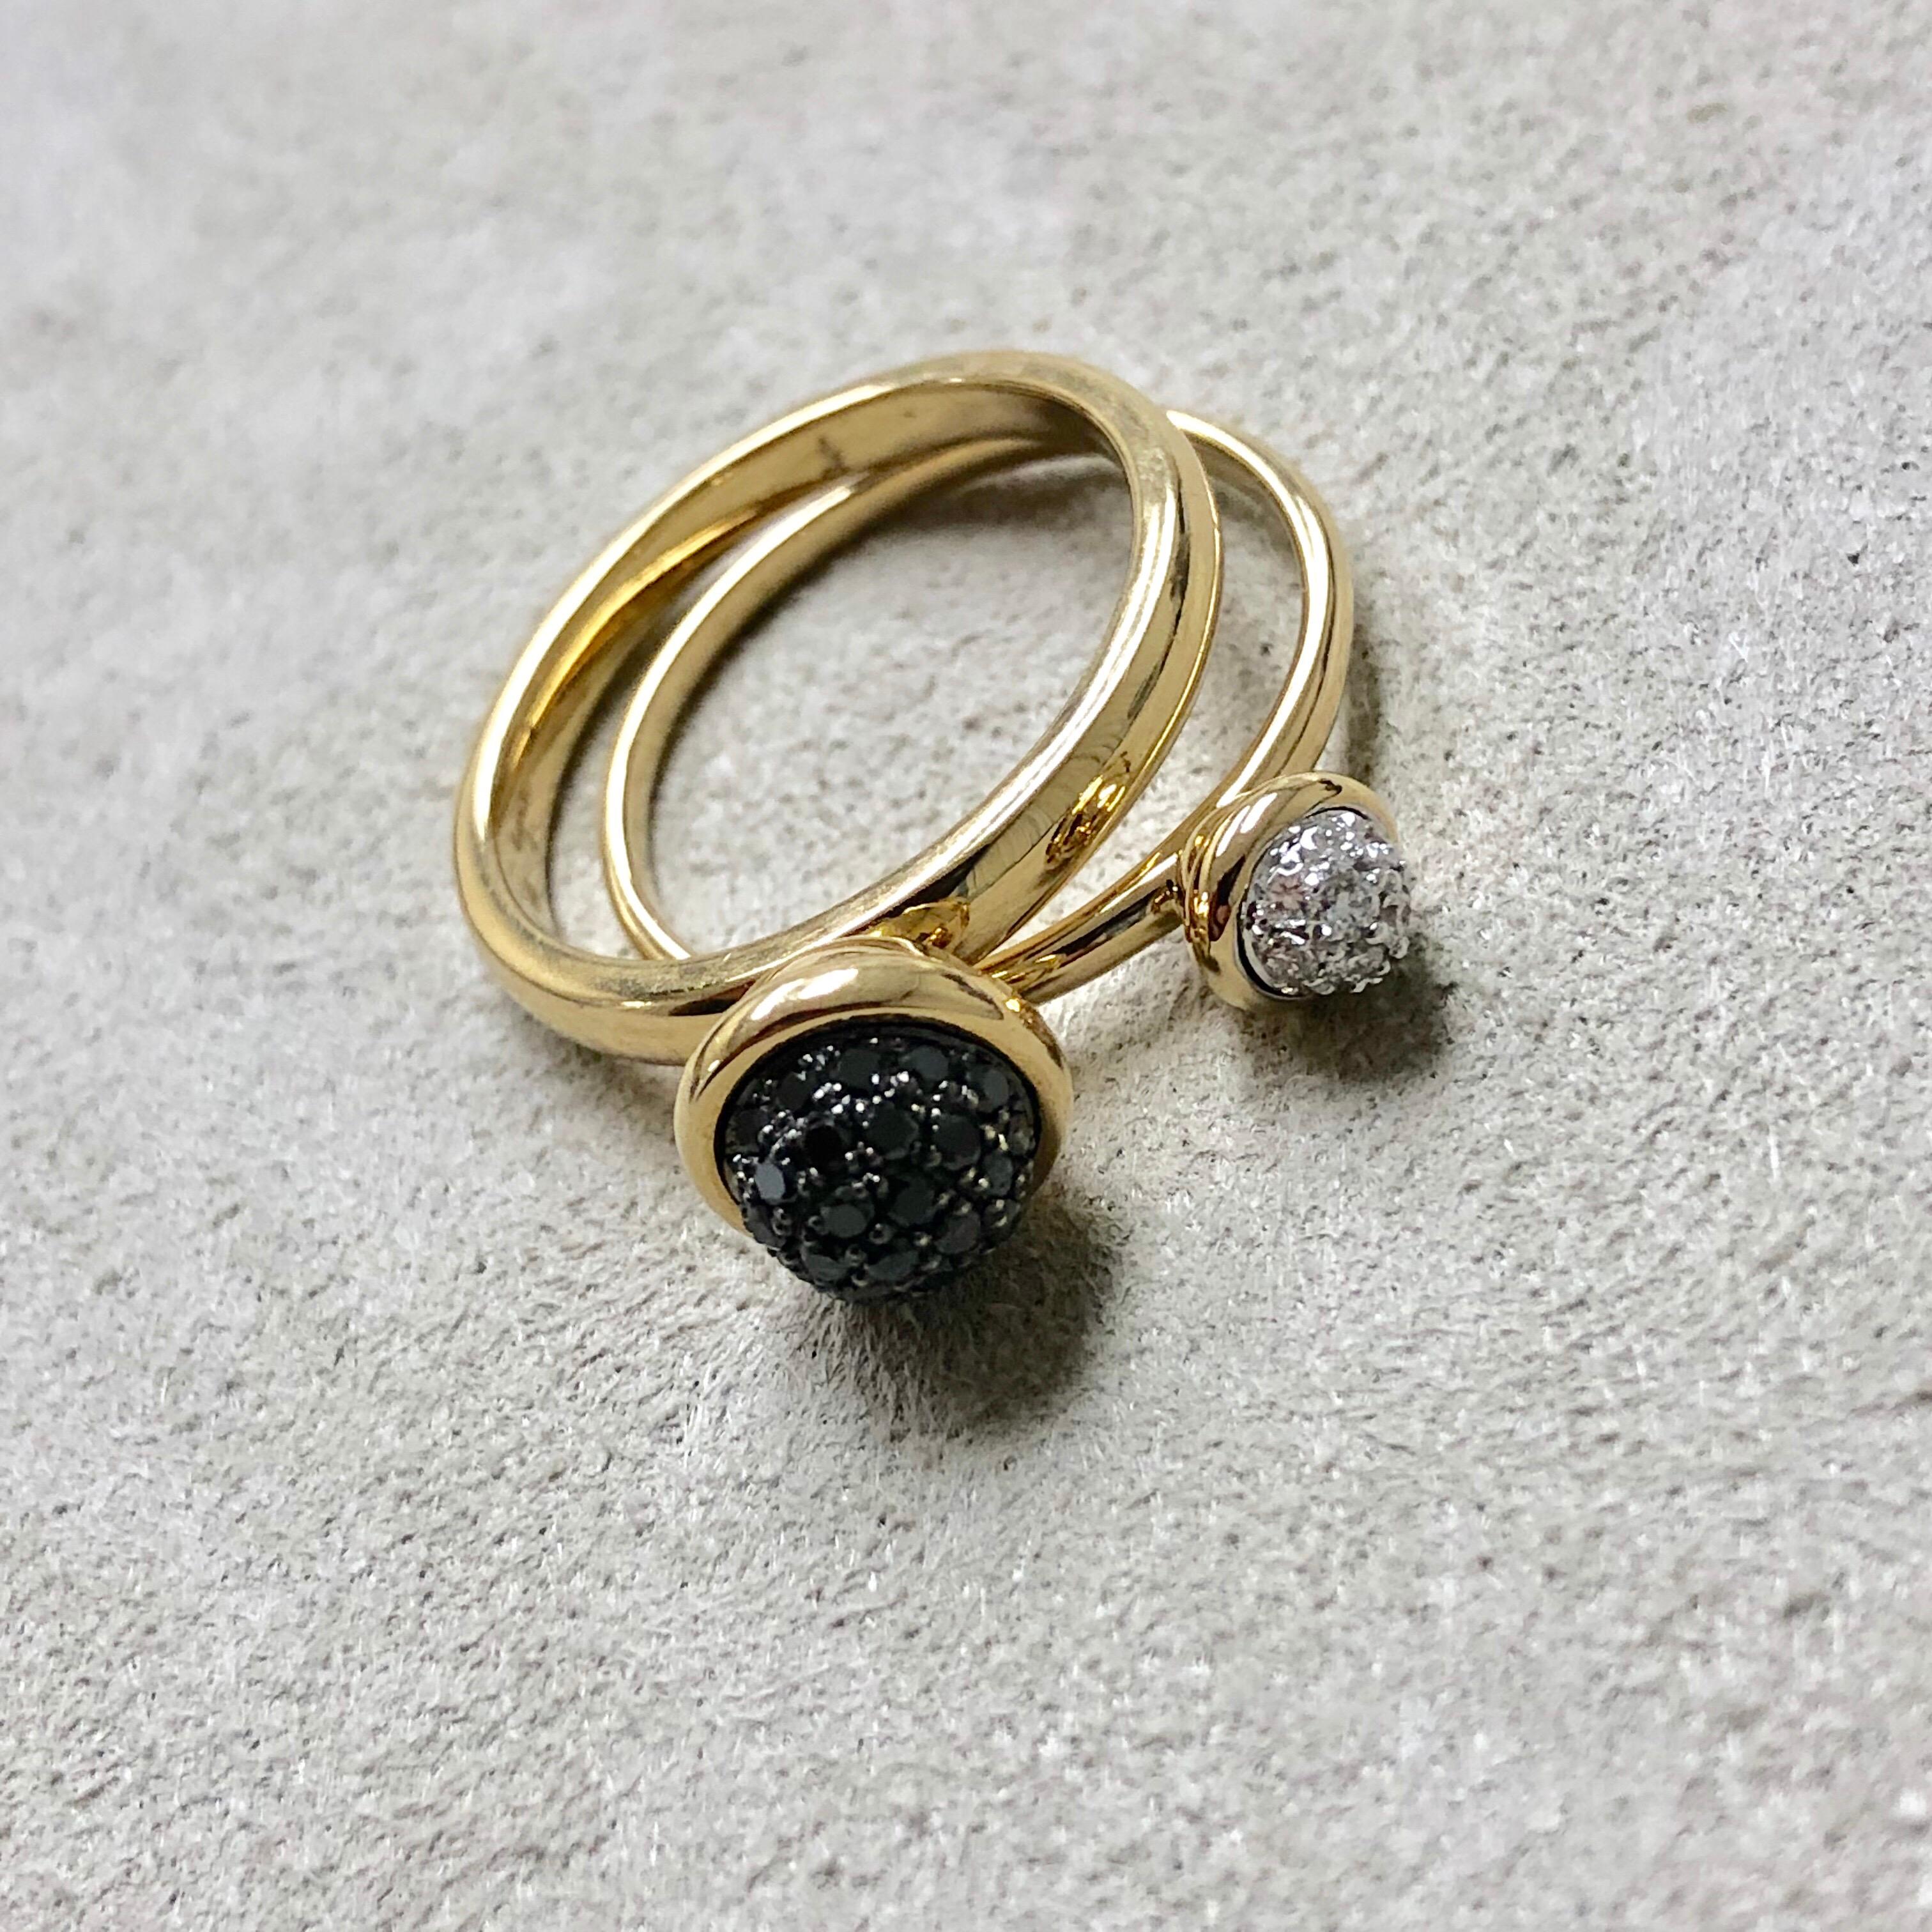 Created in 18 karat yellow gold
Black diamonds 0.30 cts approx
Diamonds 0.10 cts approx
Pair of two stacking rings
Black diamond pave ring 7mm diameter approx
Diamond pave ring 5 mm diameter approx
Ring size US 6.5, can be sized upon